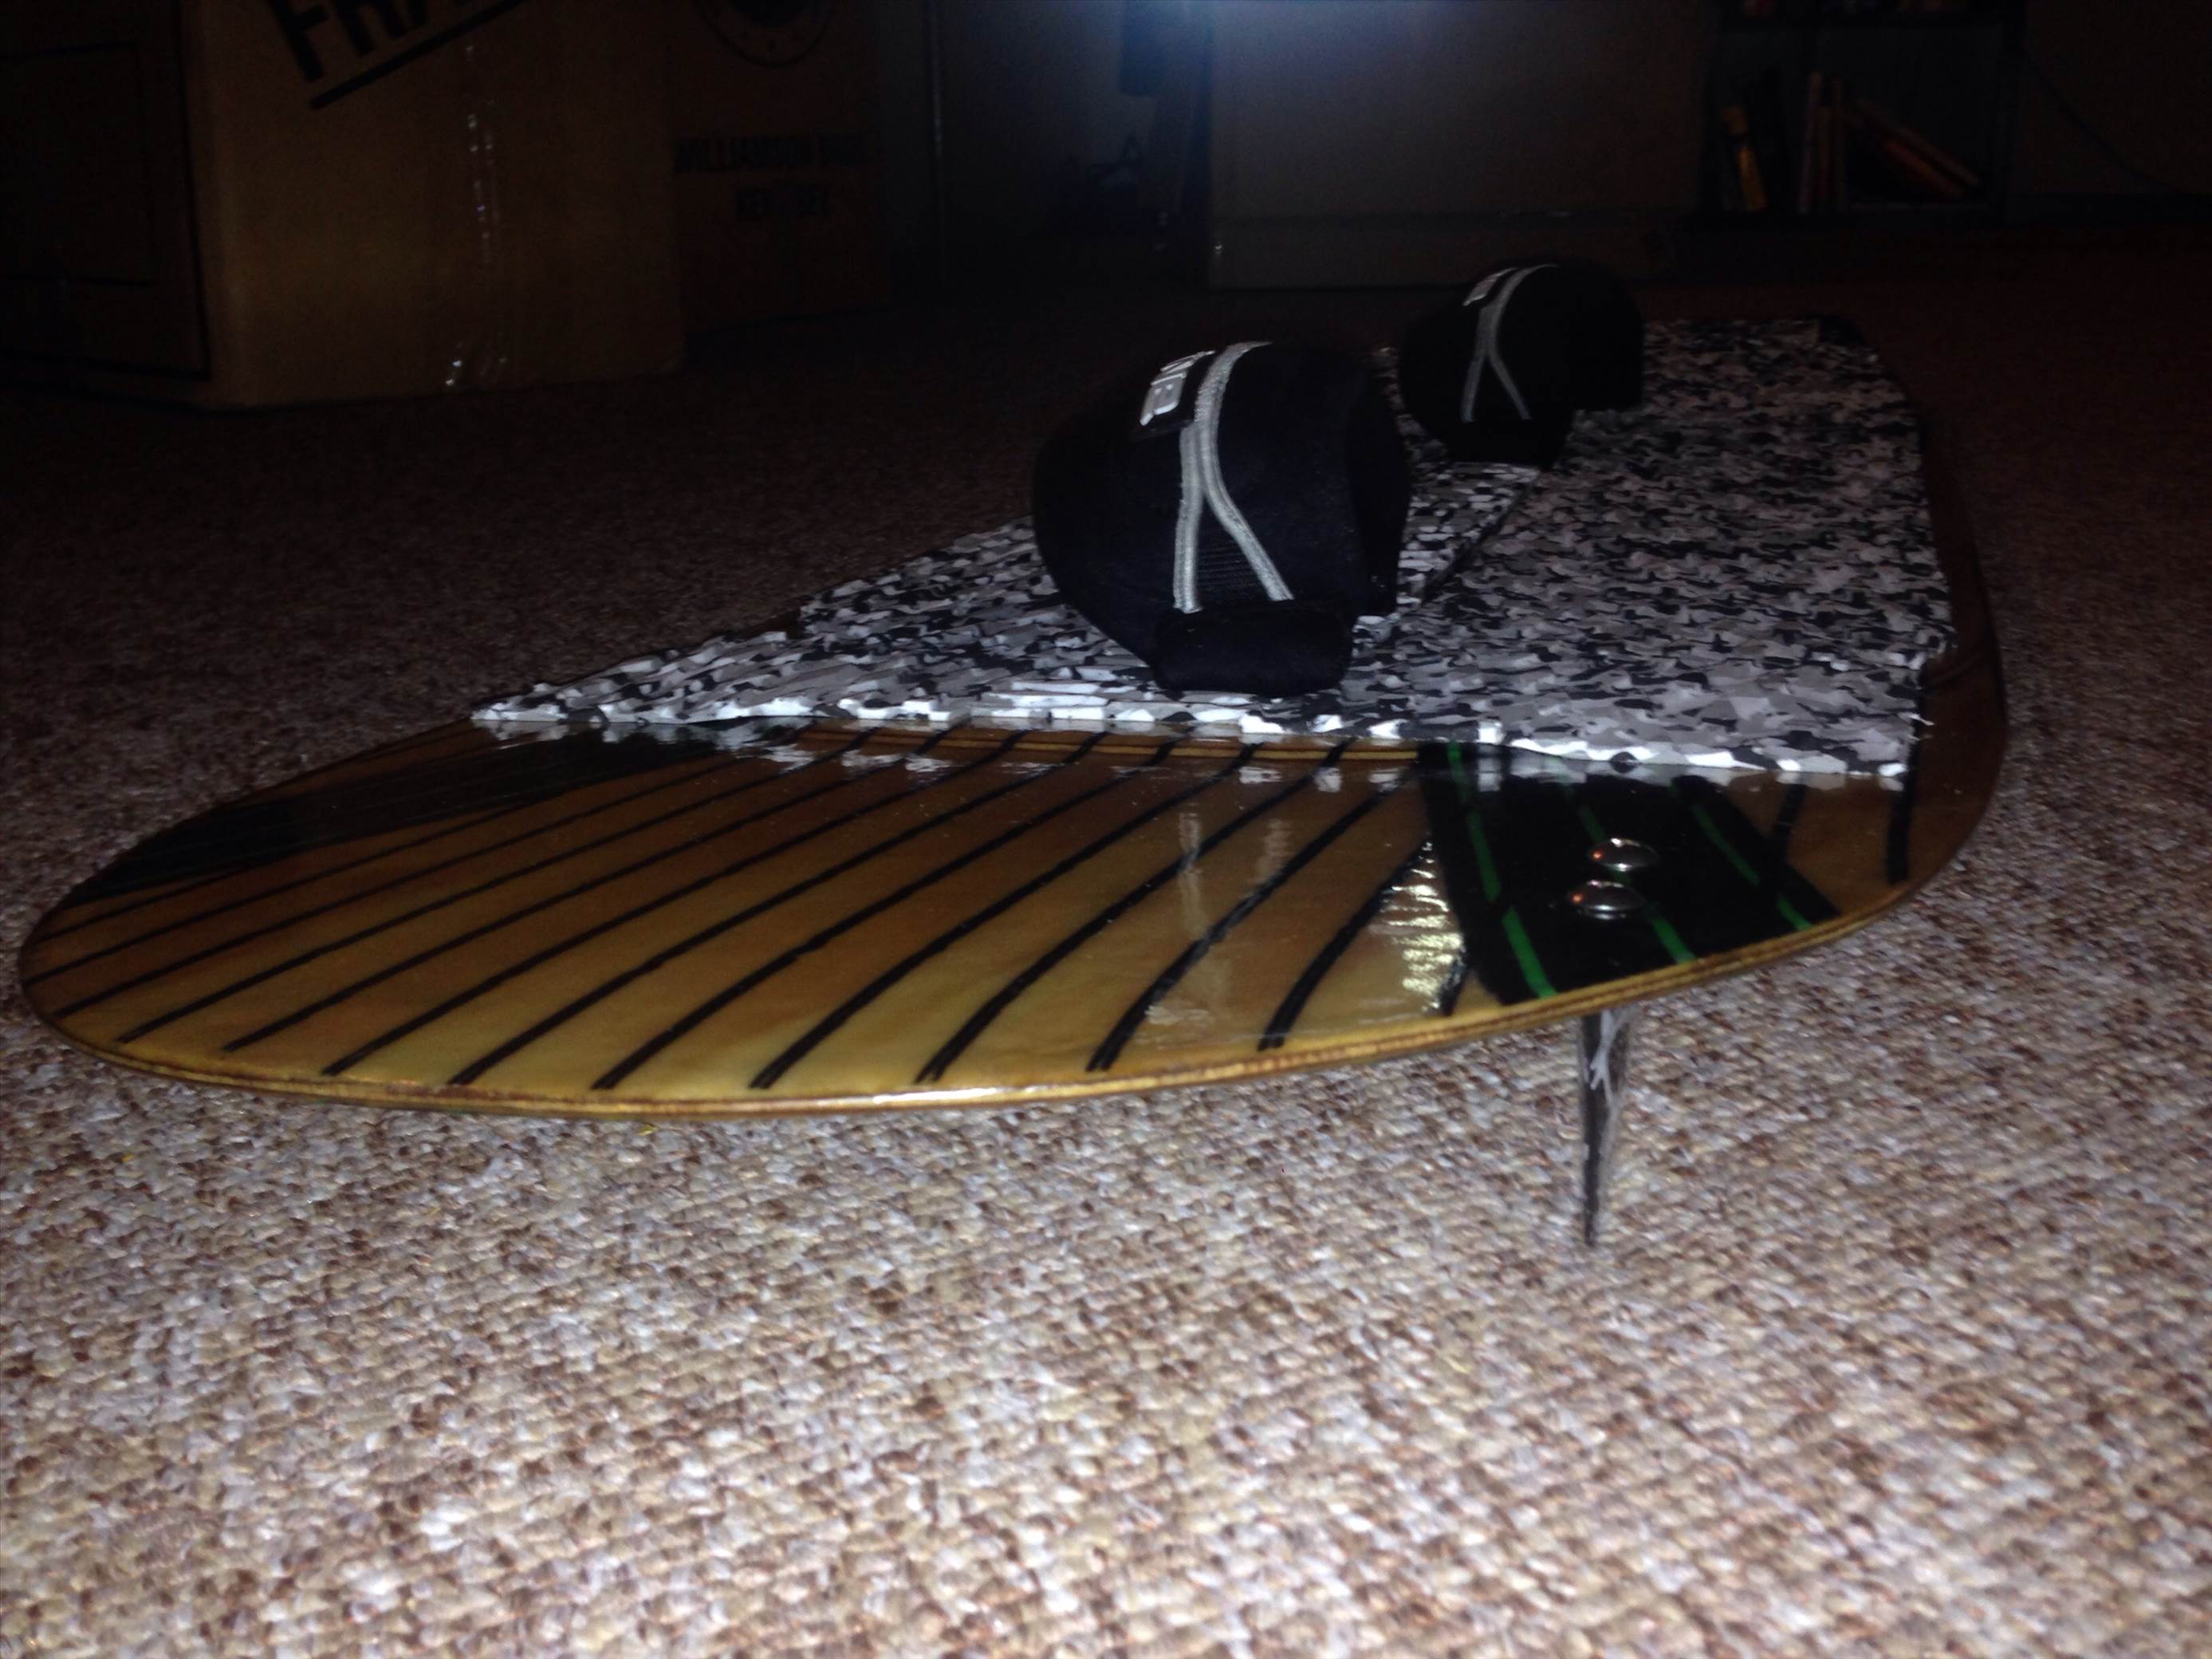 Home made wind powered water sled | Kitesurfing Forums, page 1